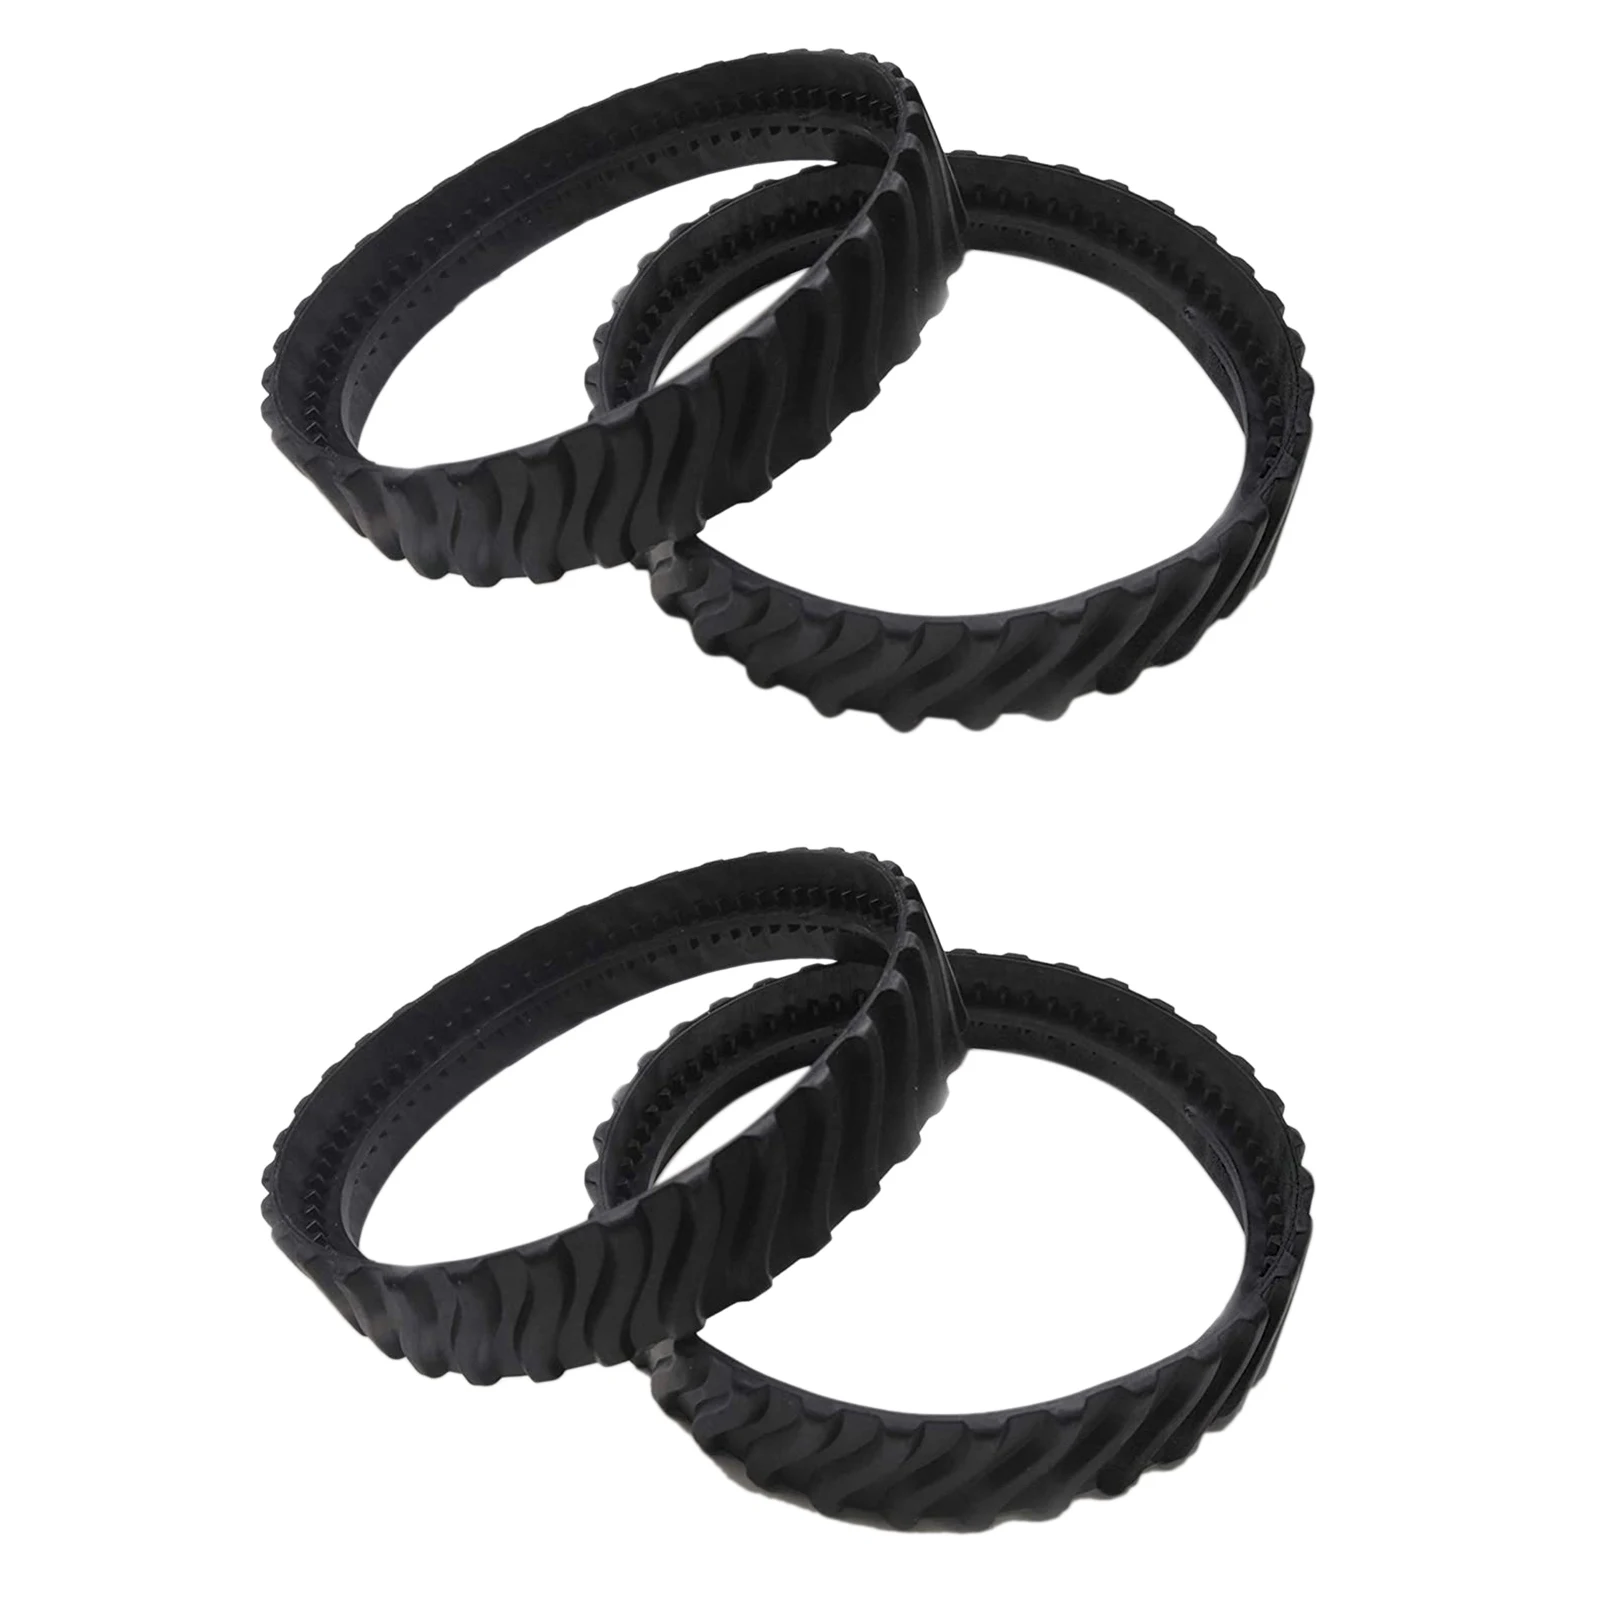 

4Pcs Exact Track Replacement In-Ground Pool Cleaner Heavy Duty Rubber Track for Zodiac MX8 Elite MX6 Elite MX8 Mx6